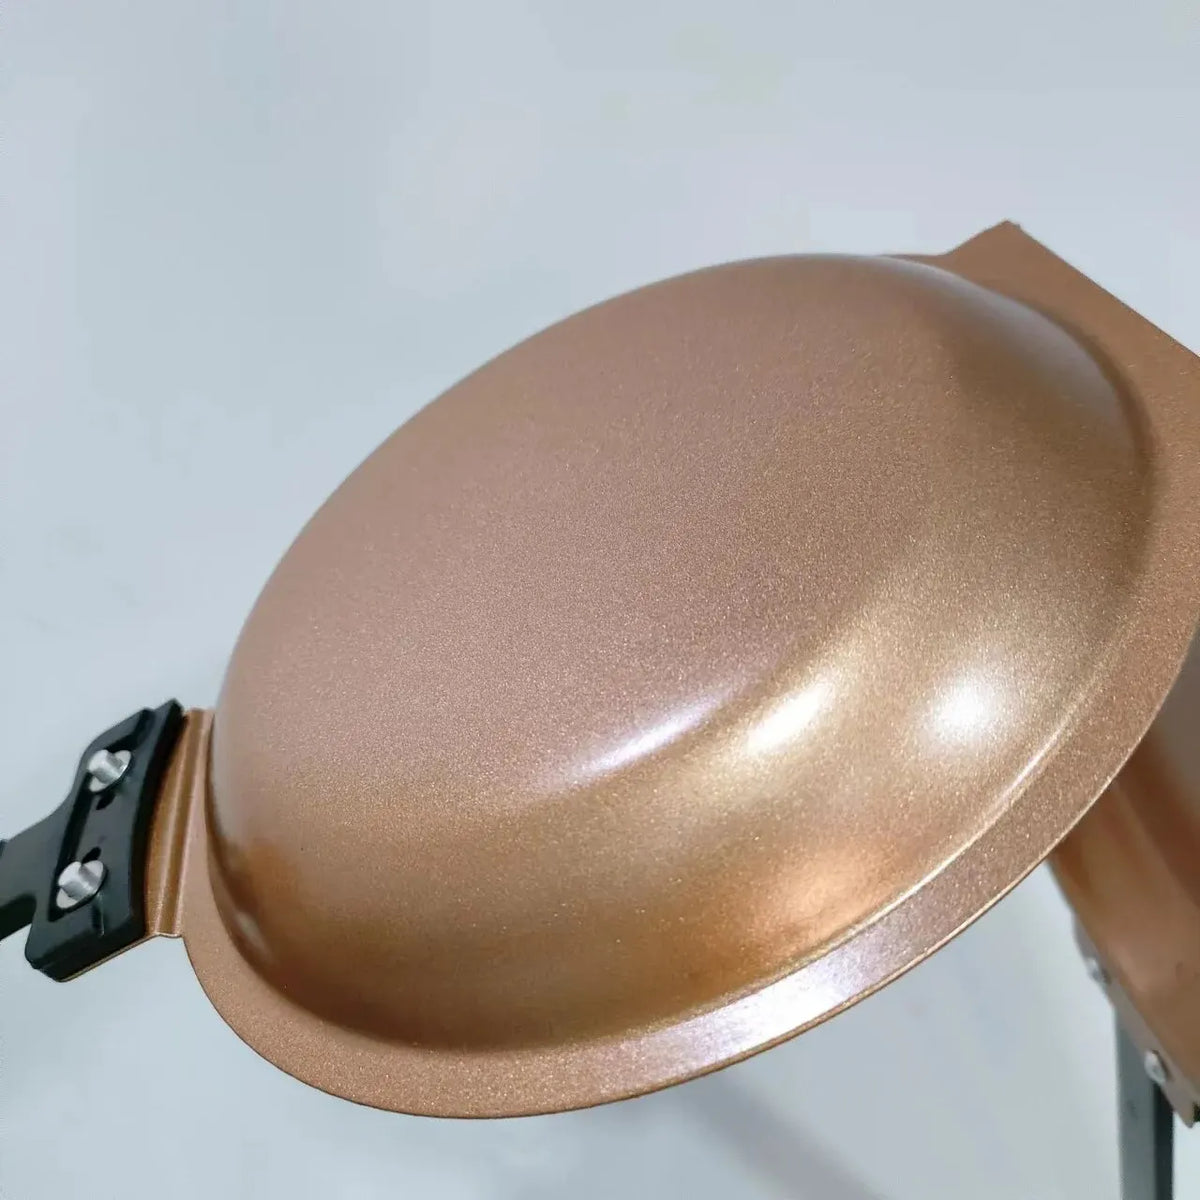 Double-Sided Frying Pan